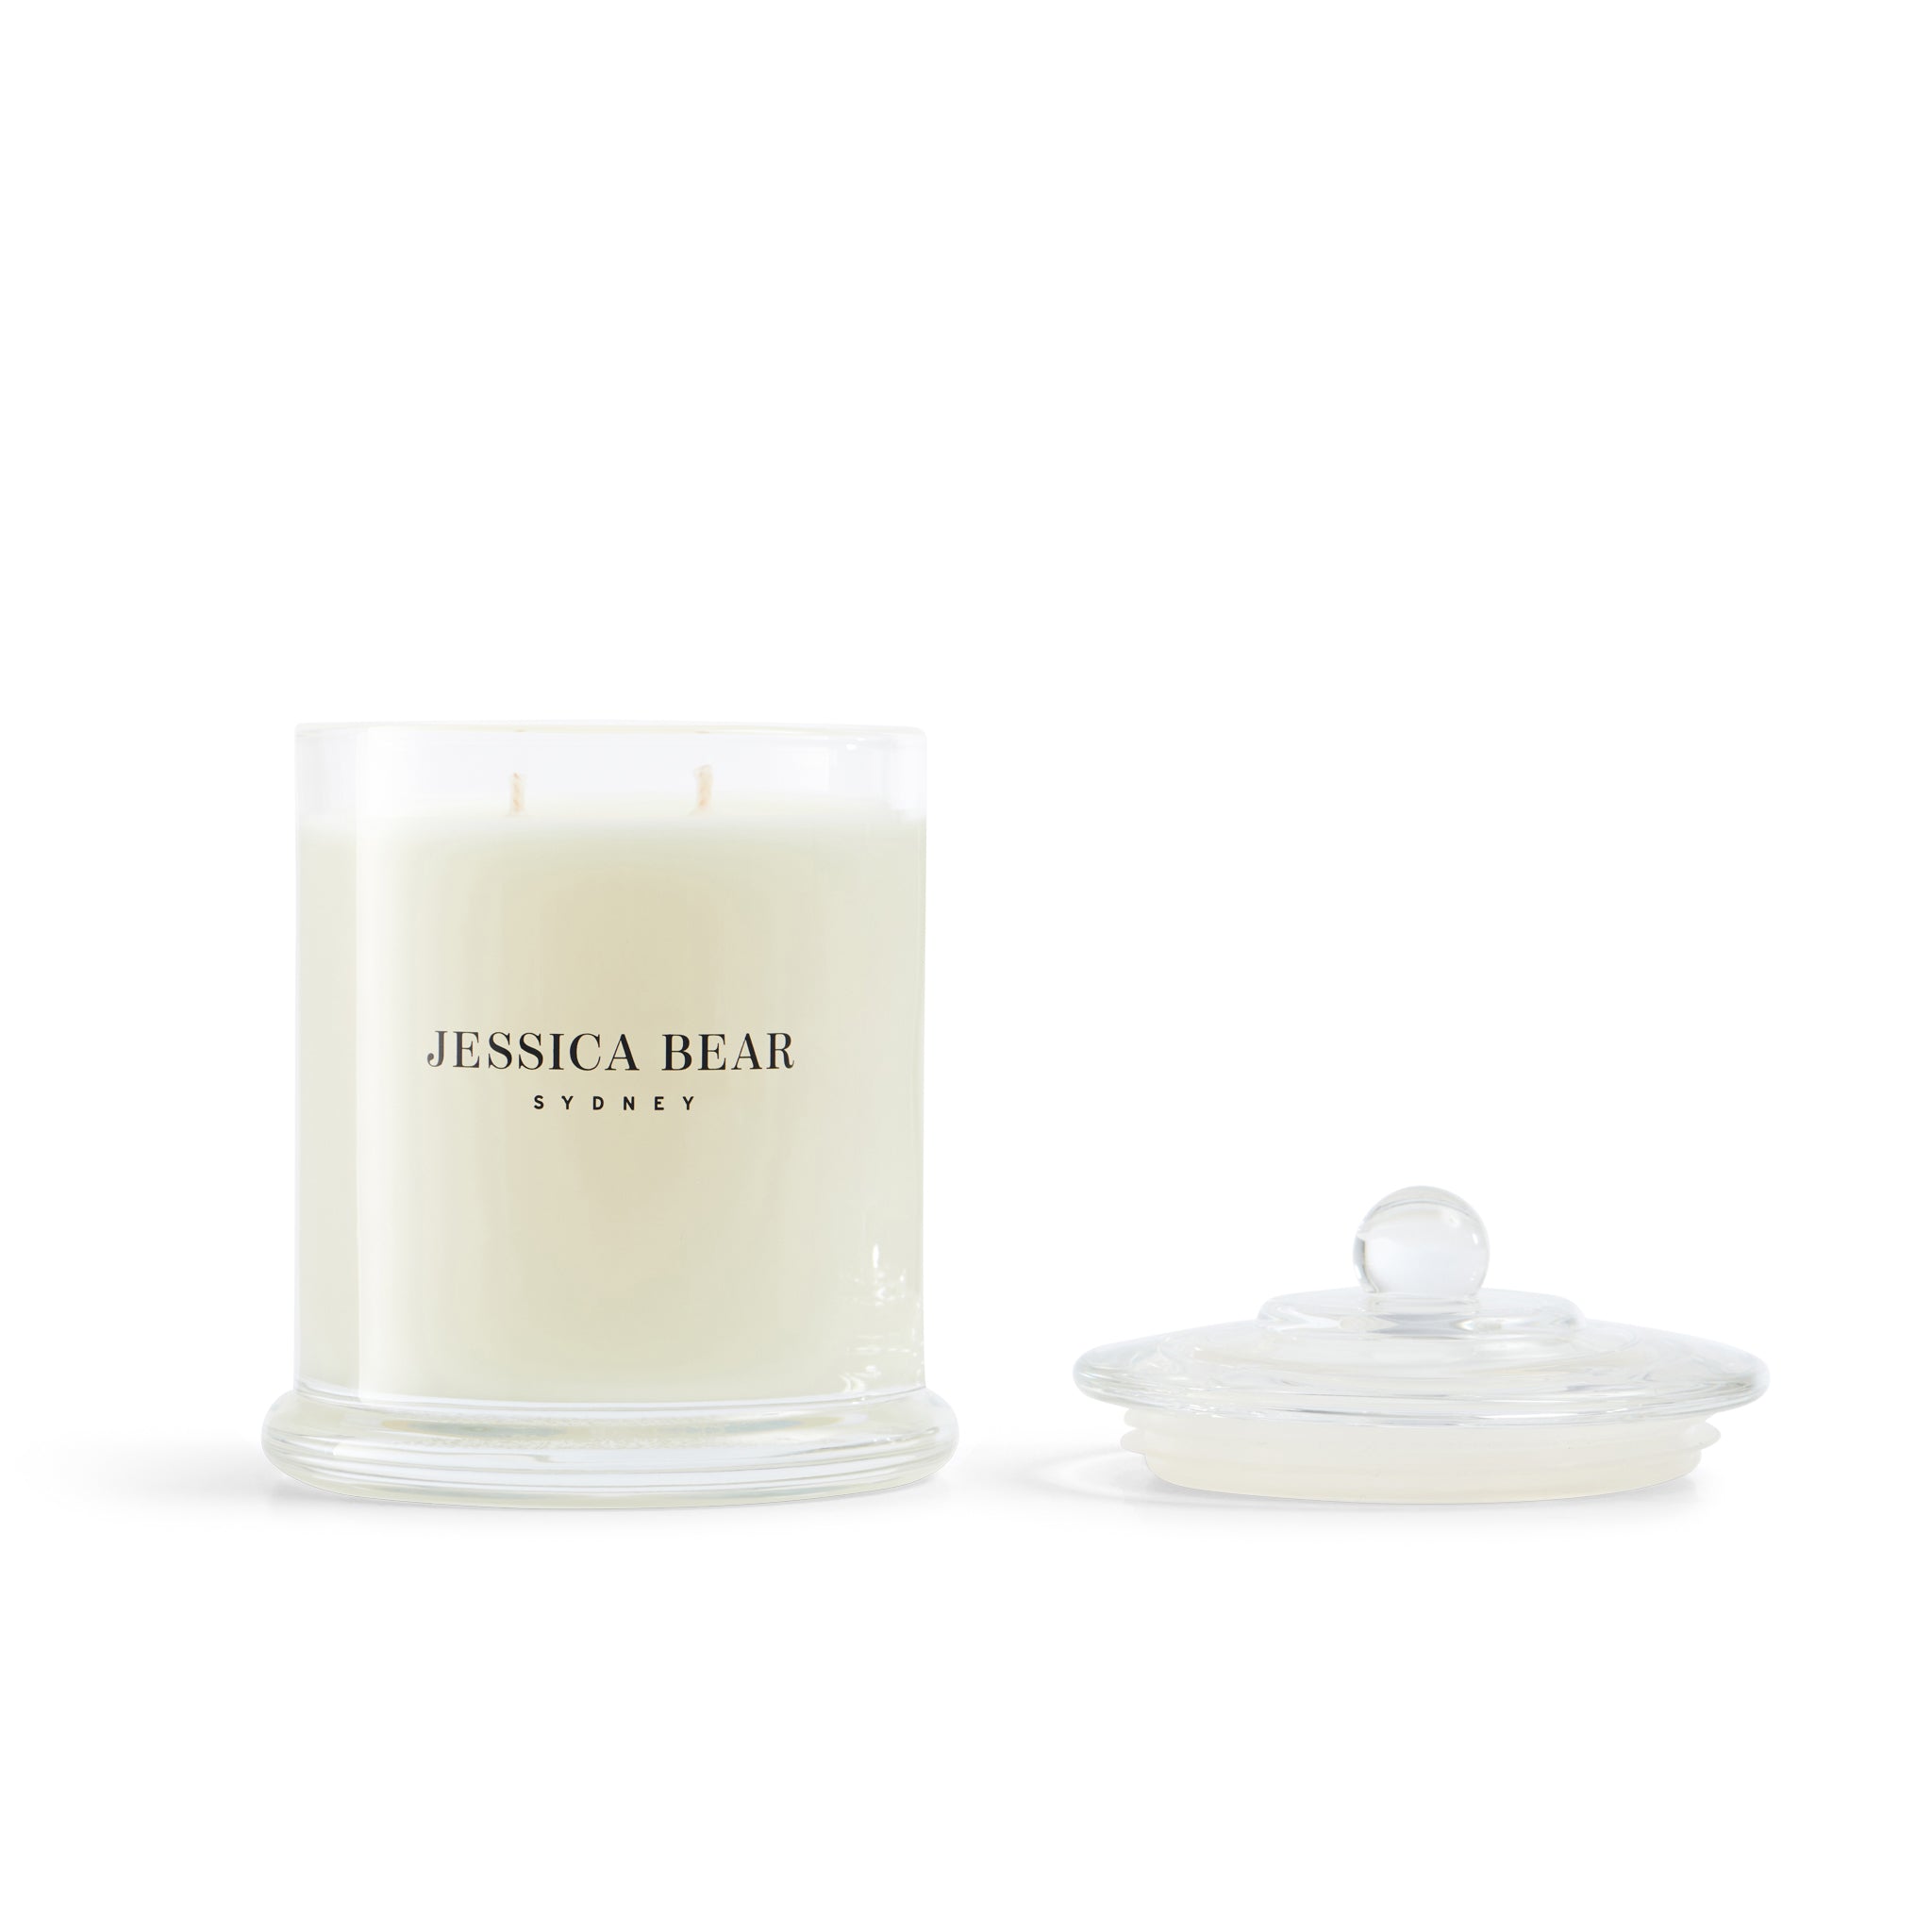 Japanese Honeysuckle - 380g Scented Candle